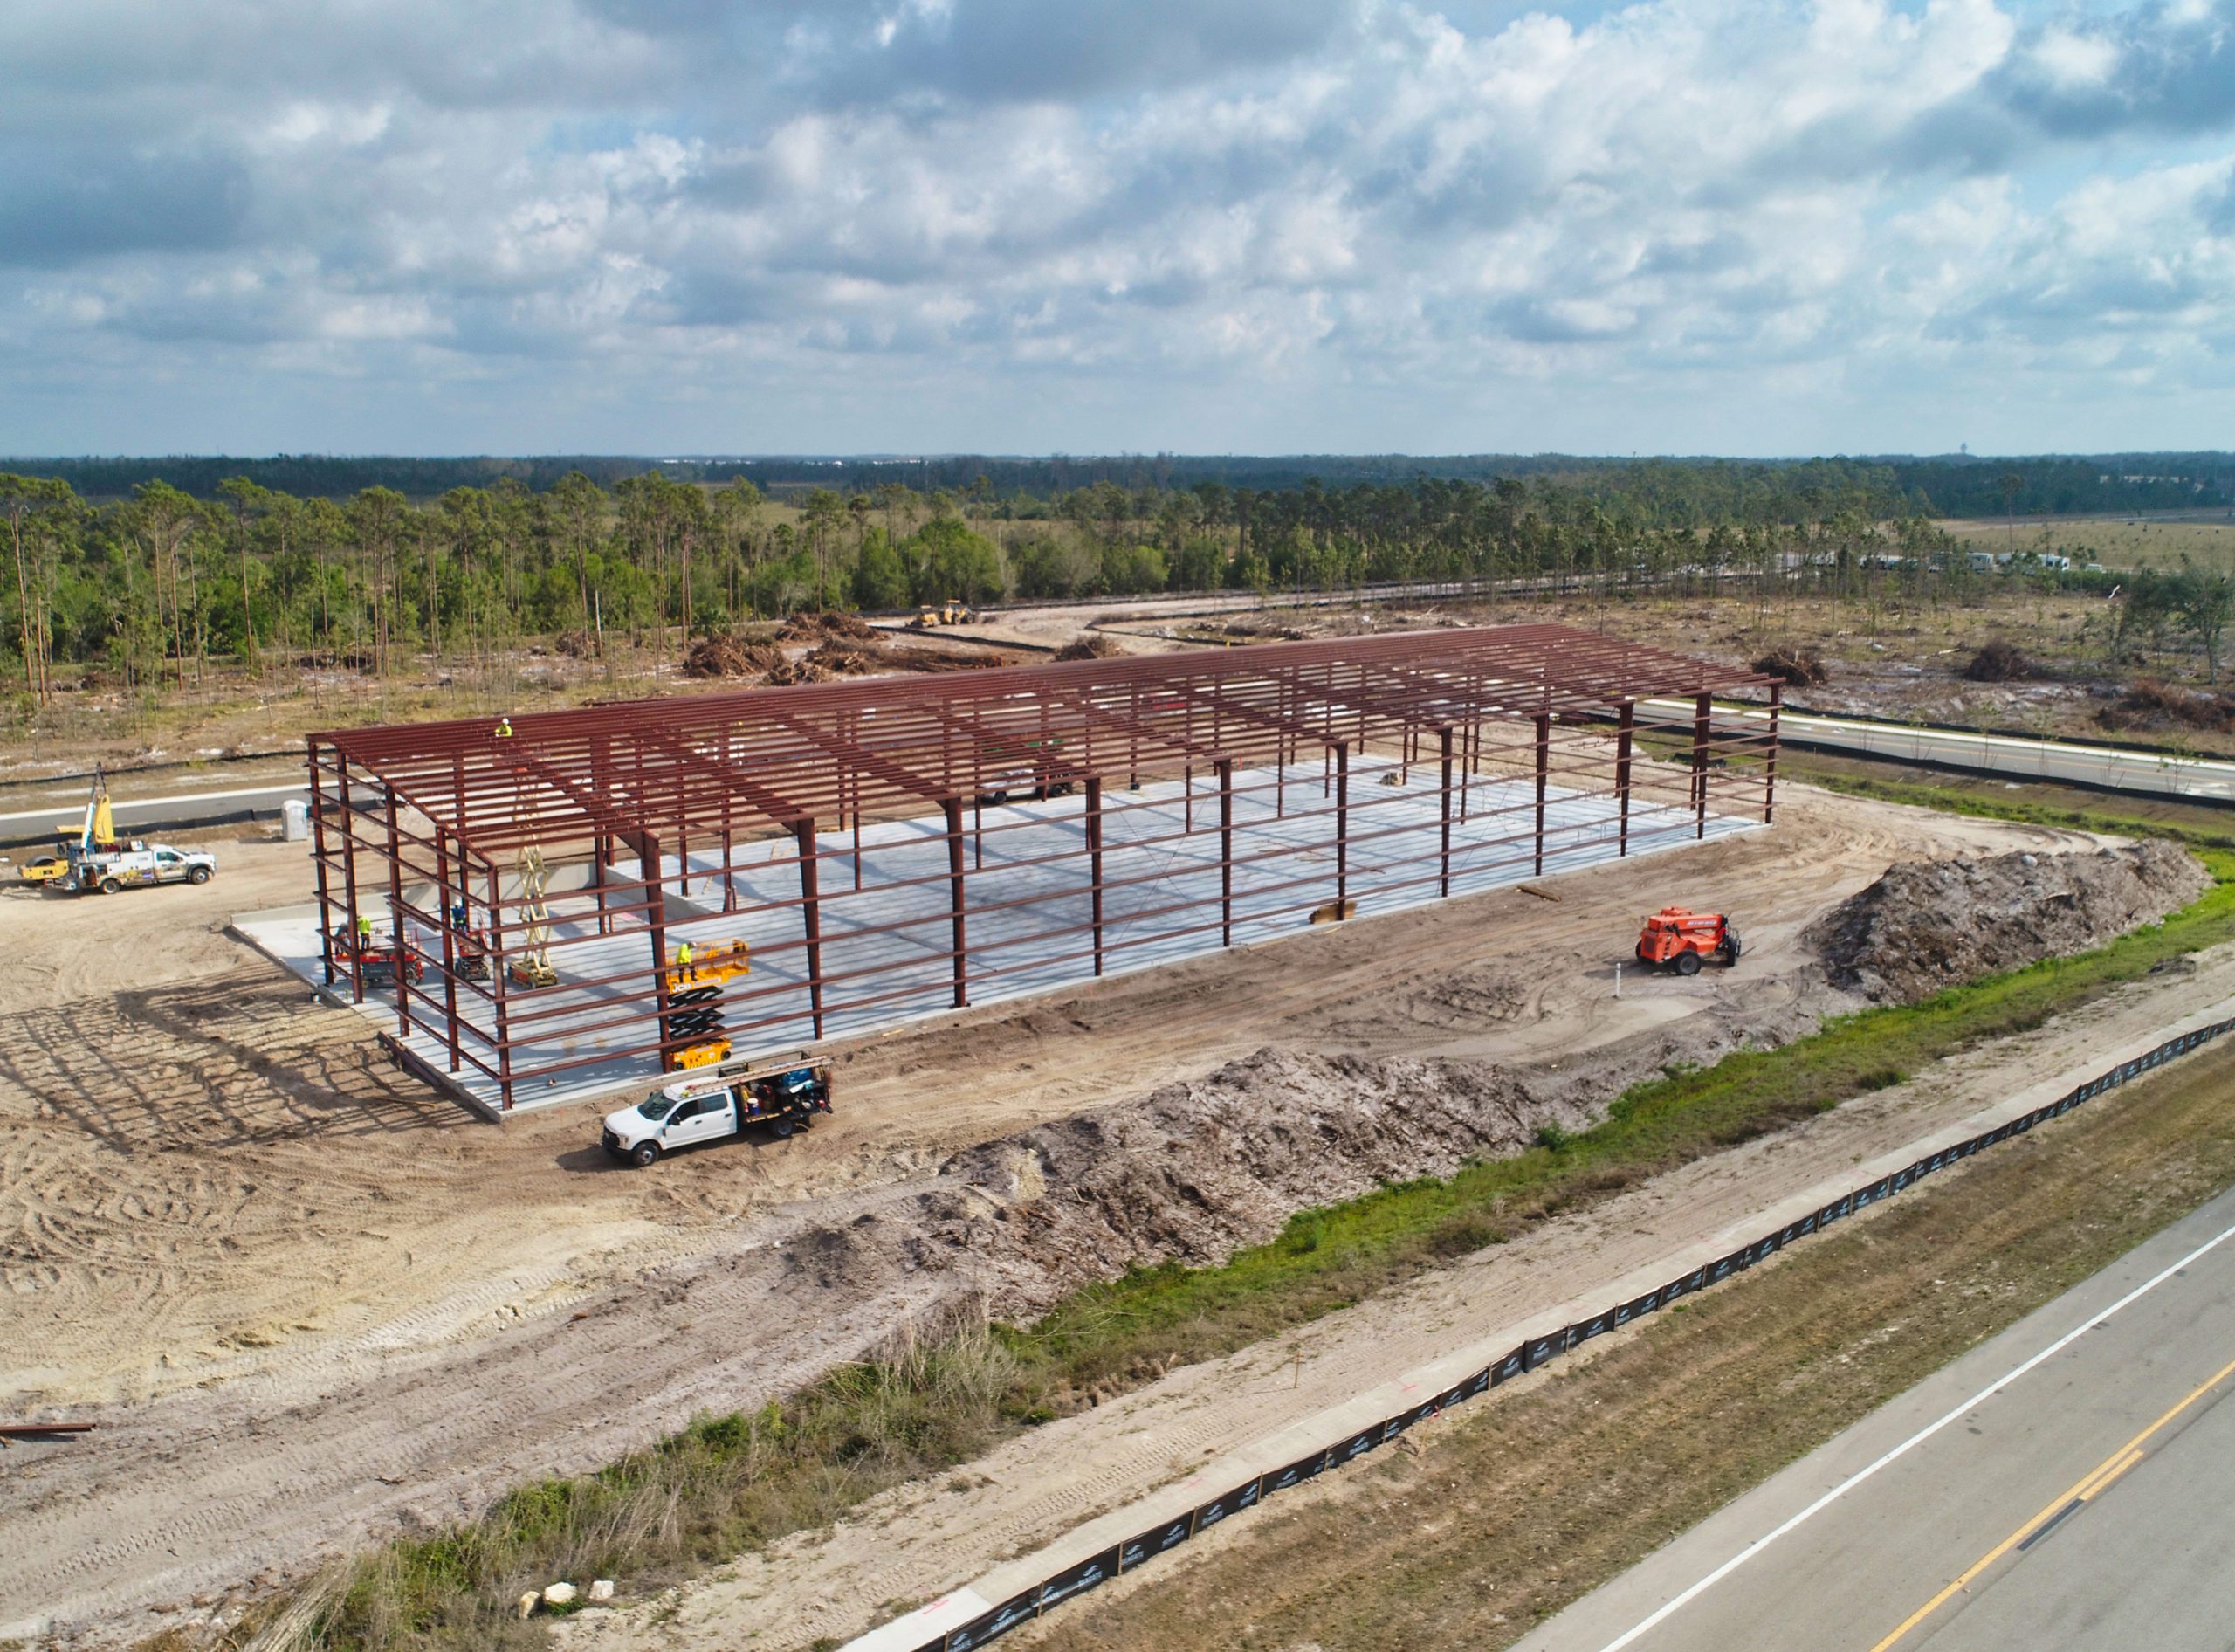 Seagate to Develop and Build Facility for Trend Moving & Storage at Alico Trade Center